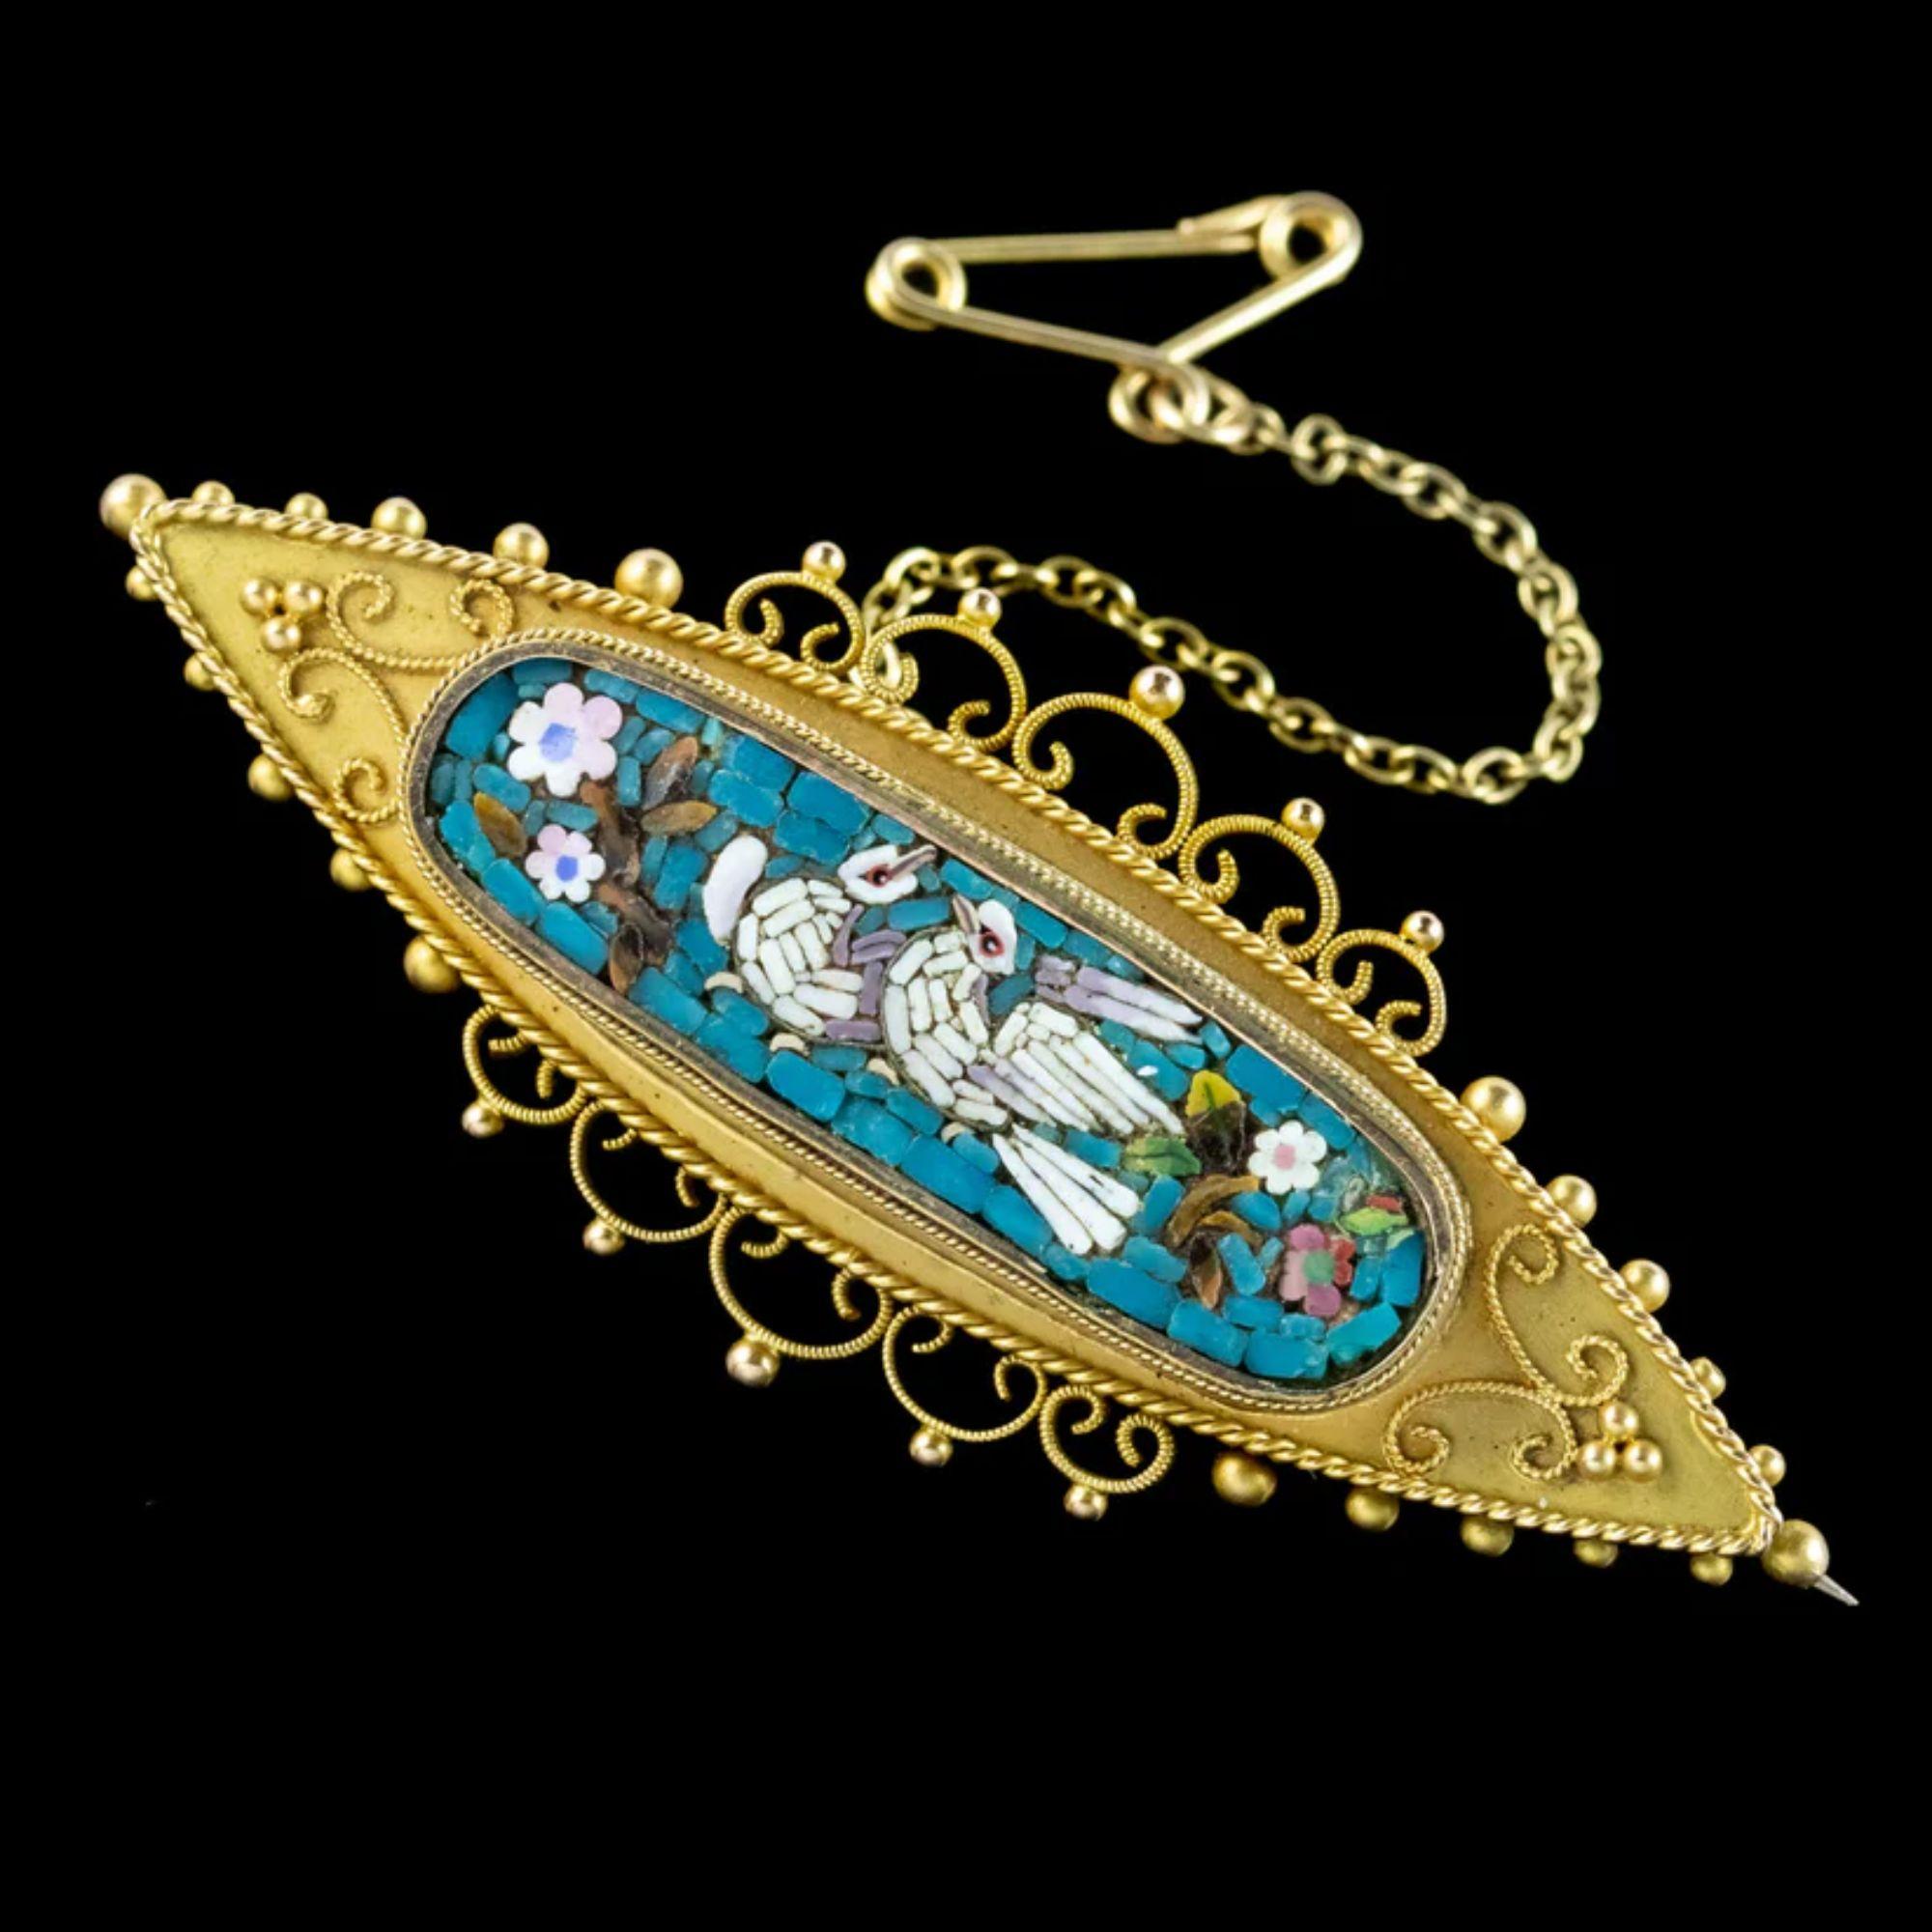 An exquisite antique mid-Victorian Etruscan revival brooch (Circa 1870) featuring a detailed Micro Mosaic centre piece depicting flowers and two white doves upon a blue backdrop. 

Roman style Micro Mosaic's such as this are made up of unusually